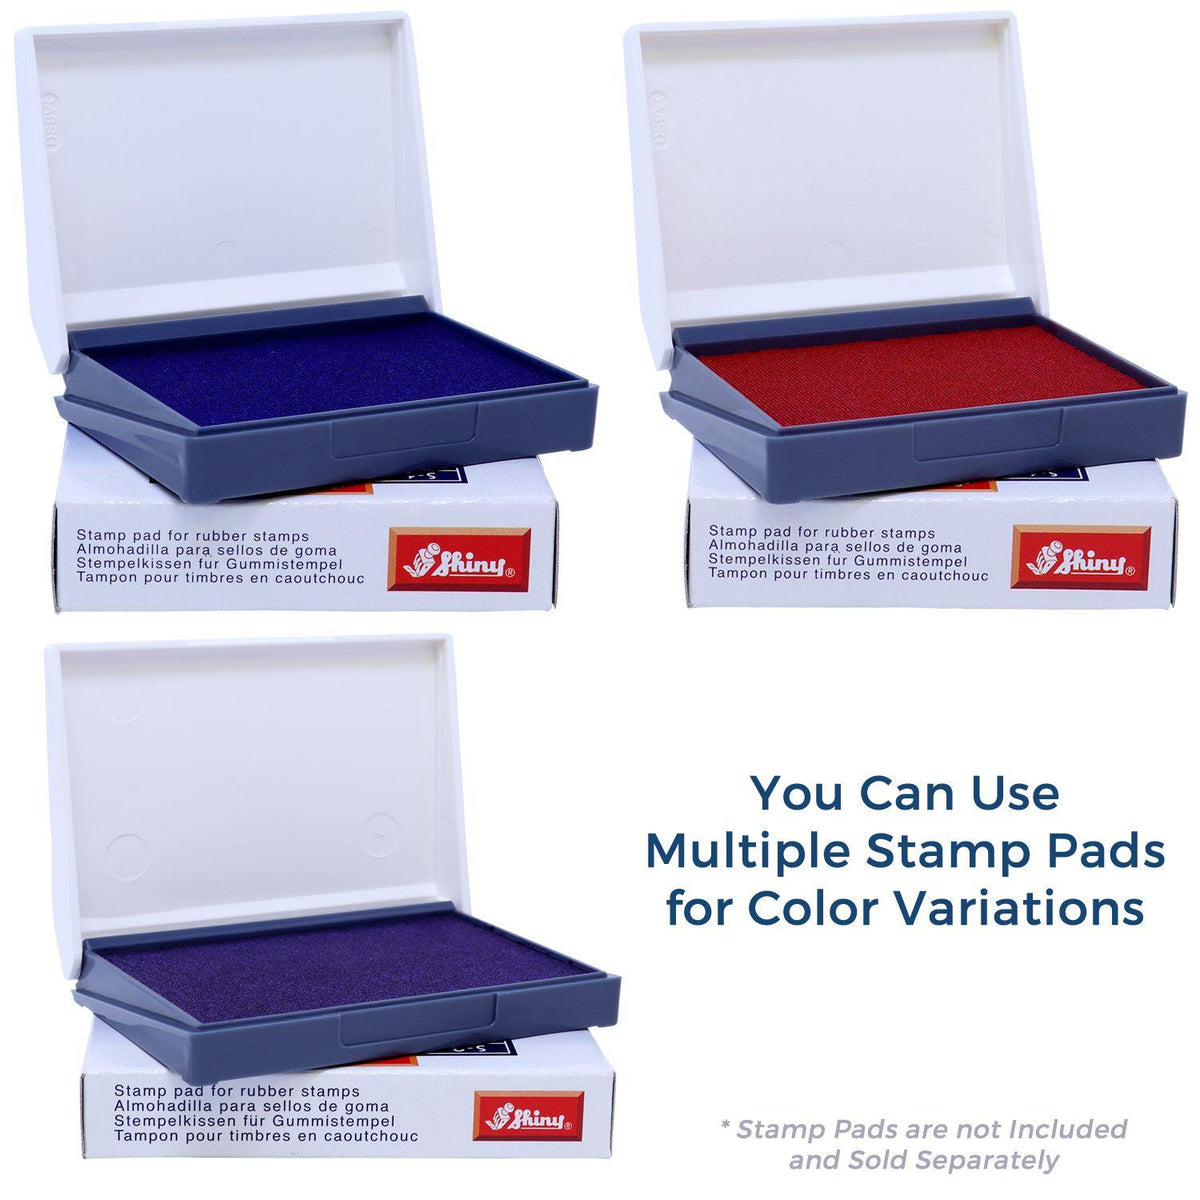 Stamp Pads for Large Improving Rubber Stamp Available